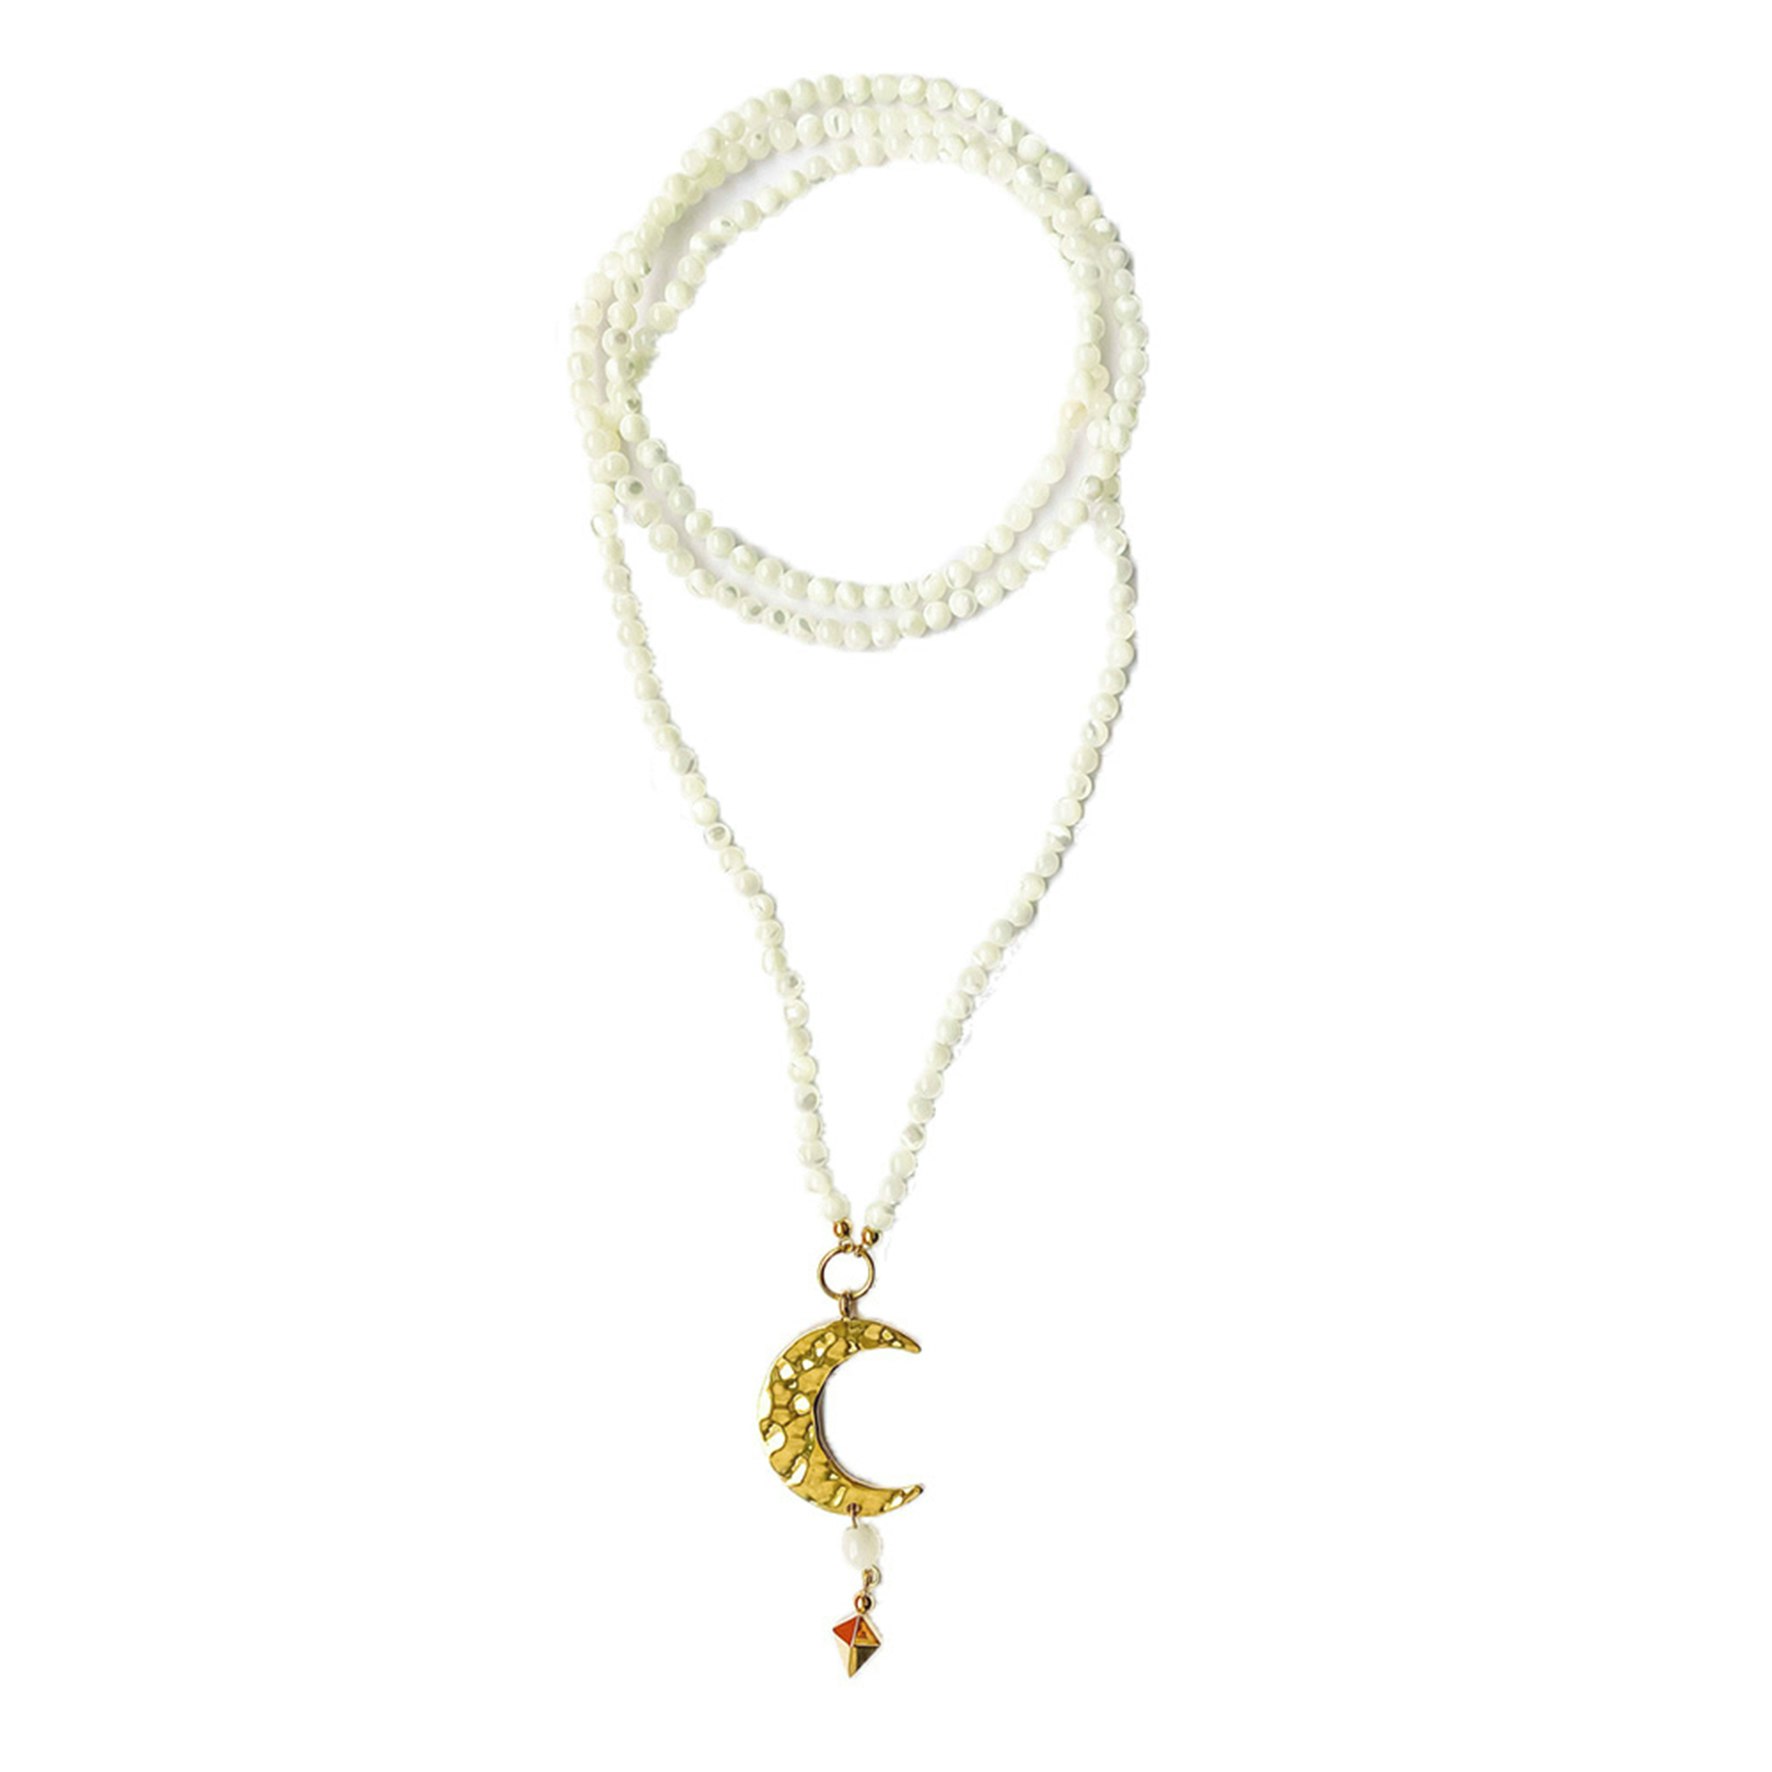 Mie Moltke Necklace With Marble Pearls von Izabel Camille in Vergoldet-Silber Sterling 925